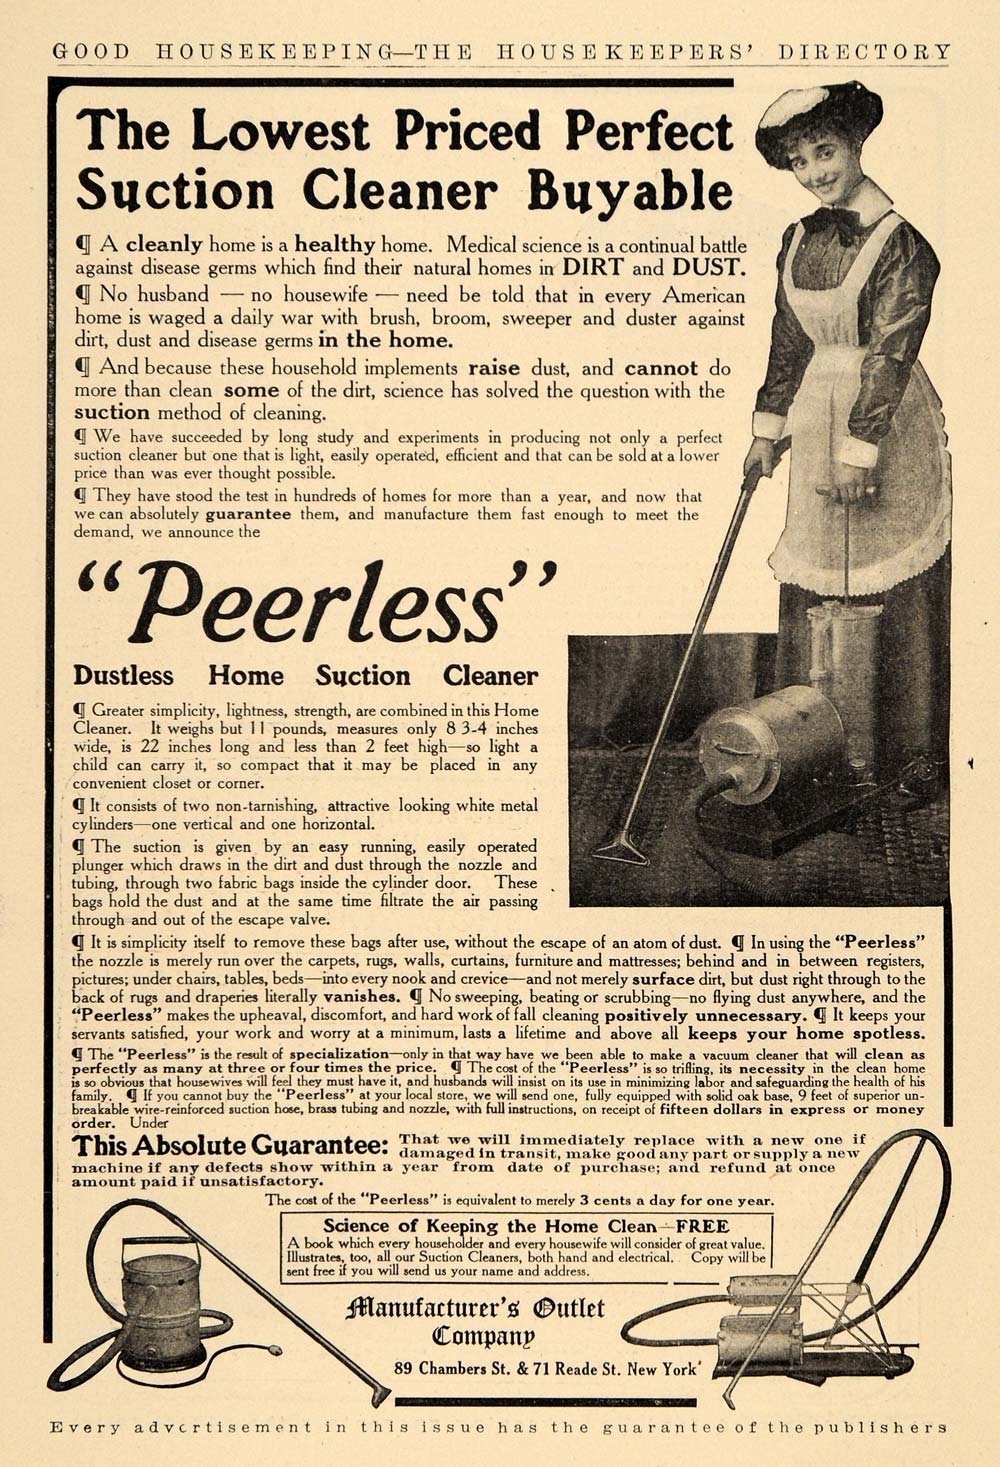 1909 Ad Manufacture's Outlet Peerless Suction Cleaner - ORIGINAL ADVERTISING GH3